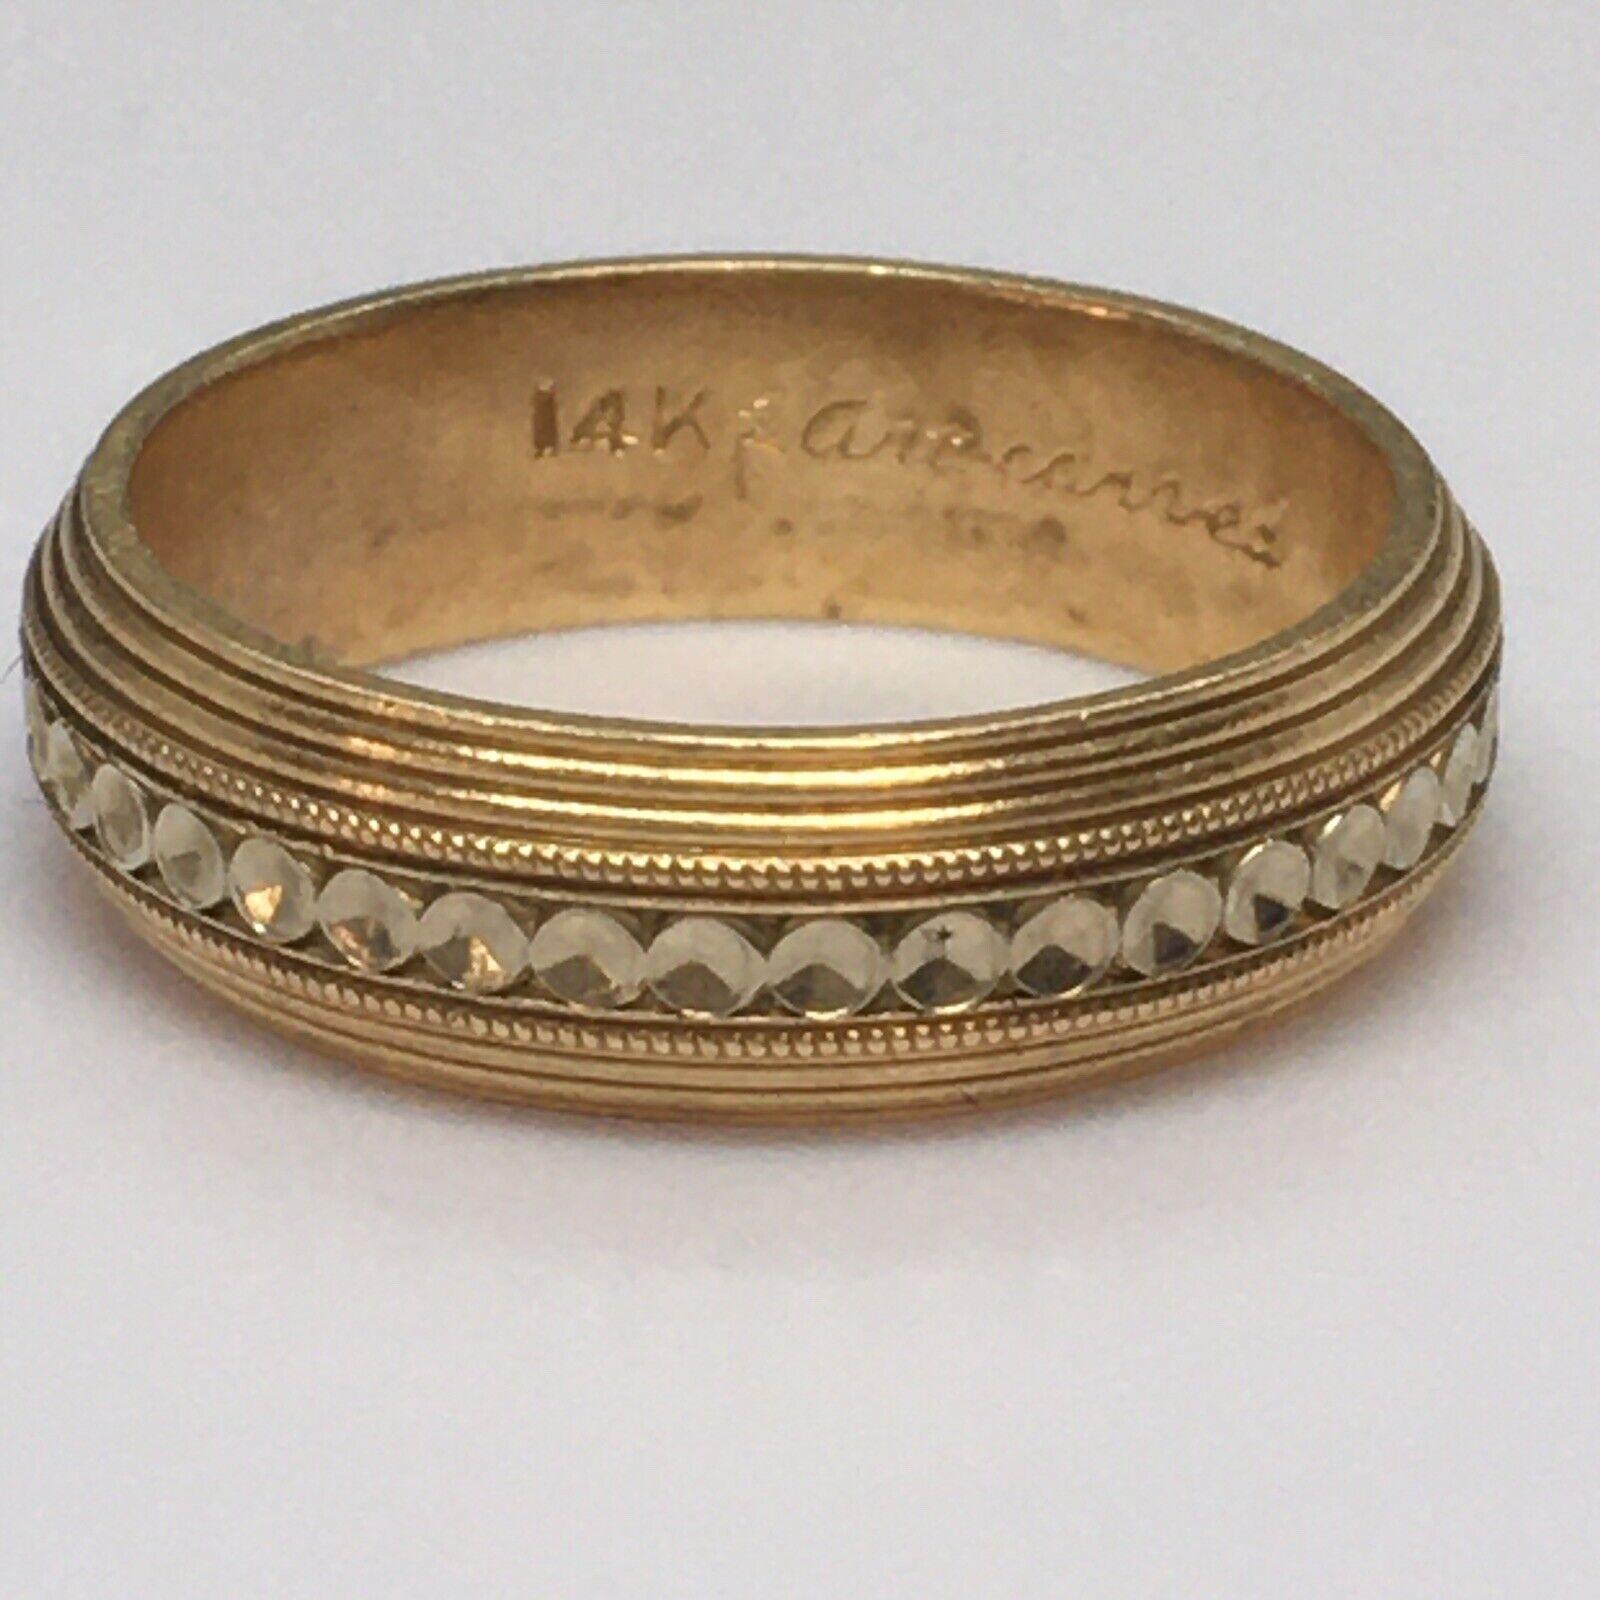 Vintage from the 1930s


Size: 5 US
Materials: Gold
Band color: Gold
Period: Art Deco

Description
14K GOLD Two Tone Design BAND RING Size 5 Floral Pattern Marked Art Carved J R Wood


Marked Art Carved
4.6 Gram
Size 6
Art Carved, J.R. Wood